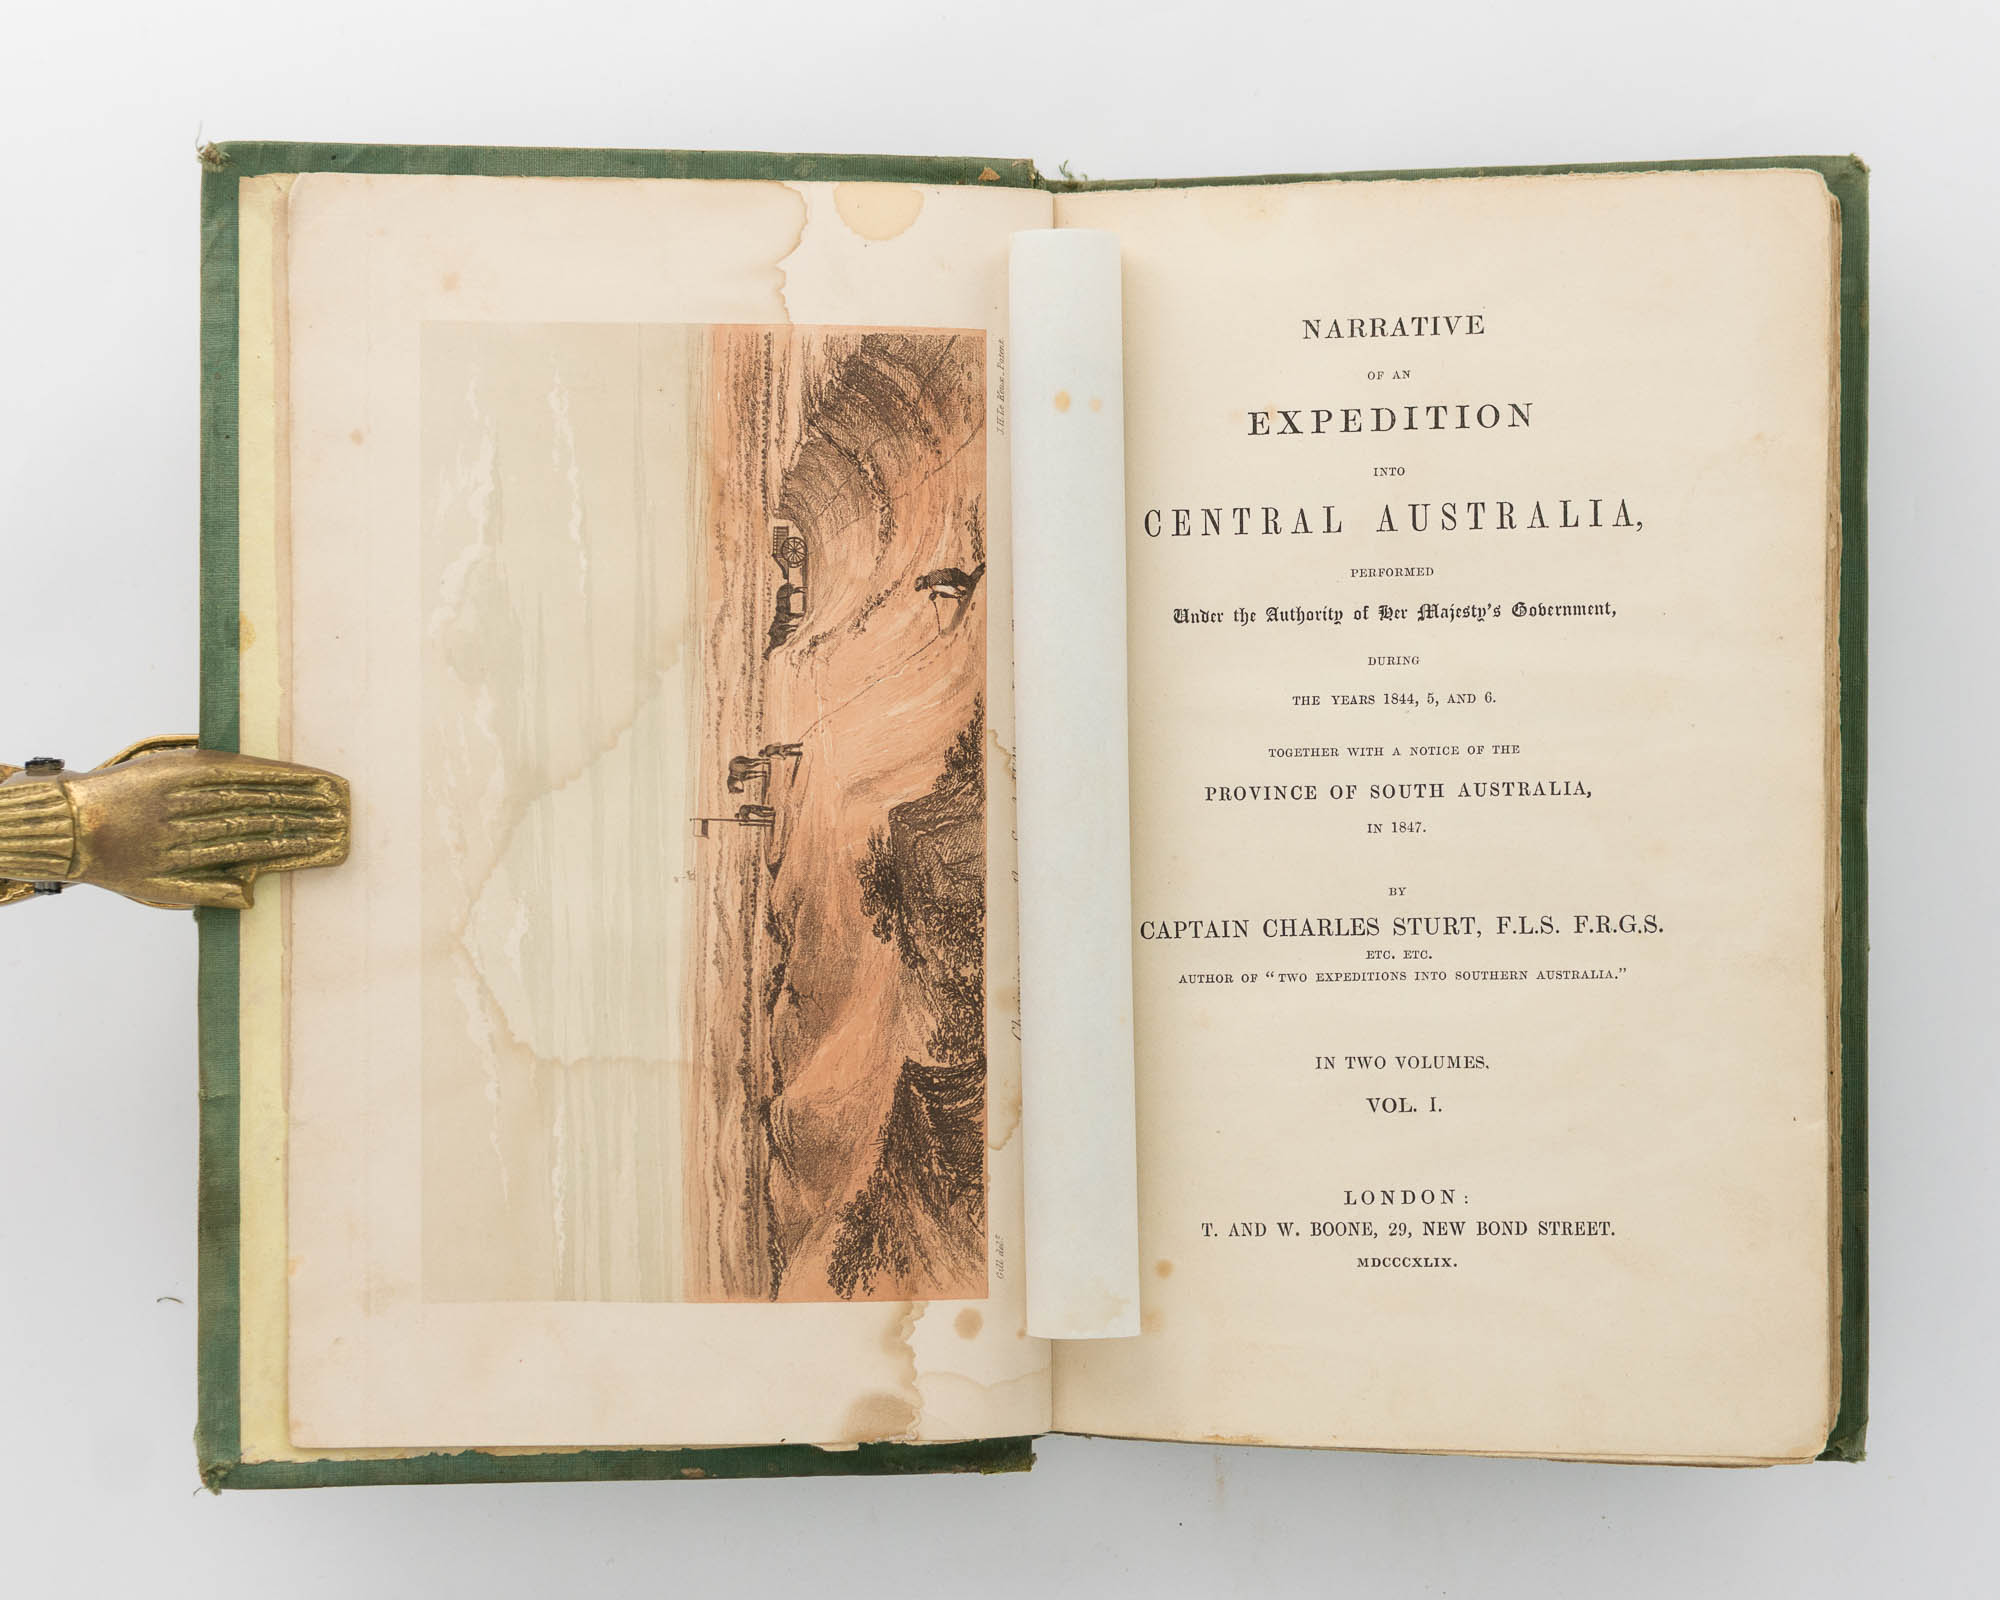 Narrative of an Expedition into Central Australia . during the Years 1844, 5 and 6. Together with a Notice of the Province of South Australia, in 1847 - [GOYDER, George Woodroofe] STURT, Charles